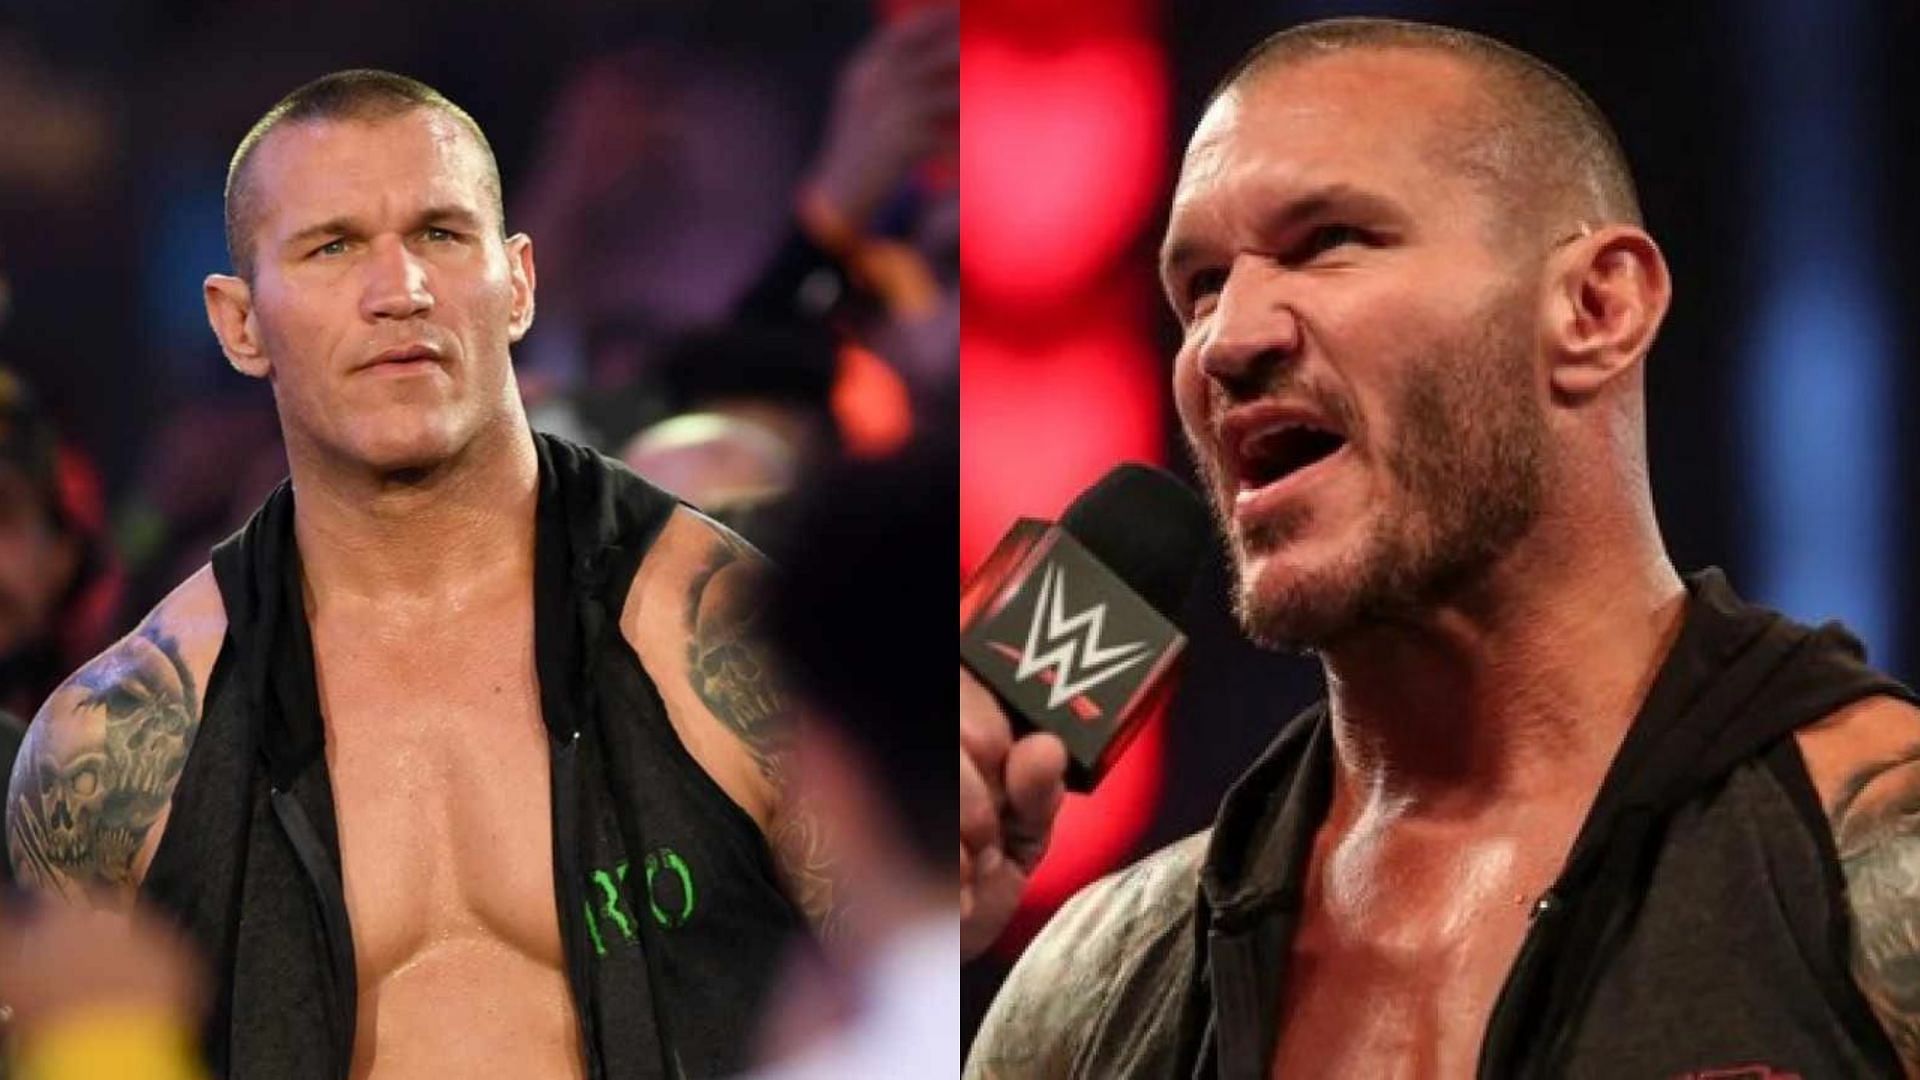 Could Randy Orton be on his way back to WWE?